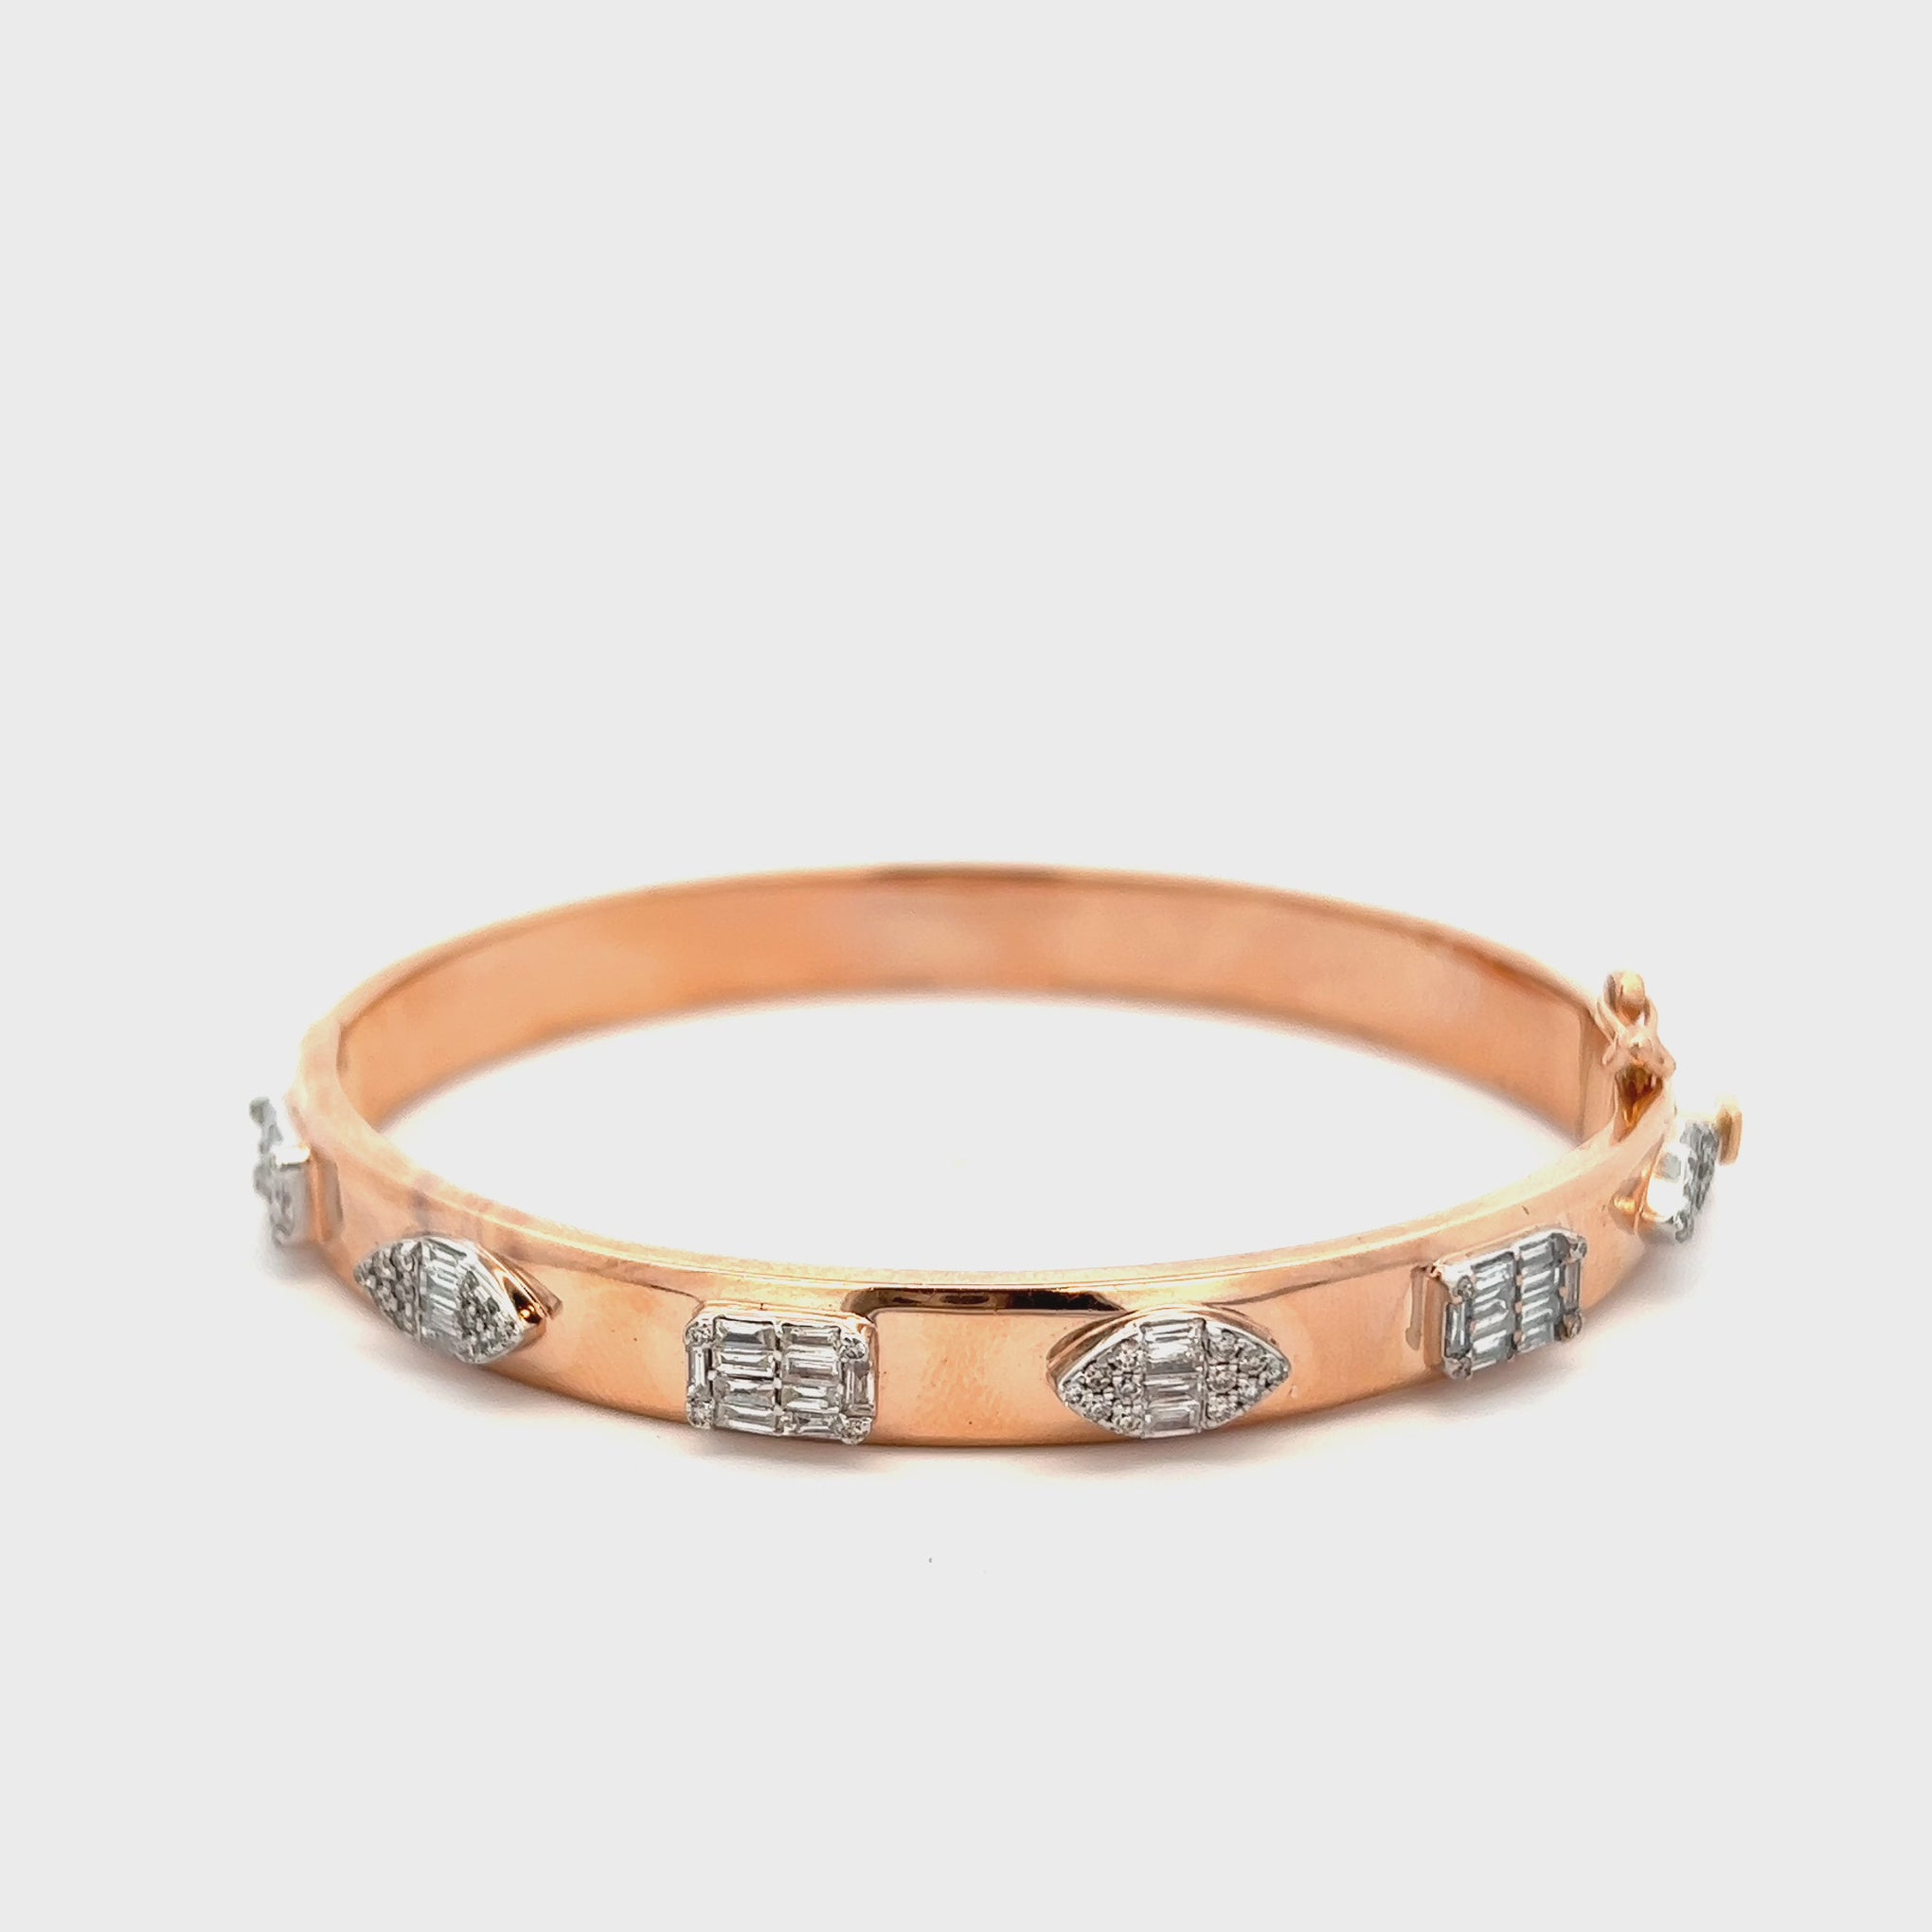 14KT ROSE GOLD WITH ROUND AND BAGUETTE CUT DIAMONDS ALTERNATING SHAPE BRACELET.